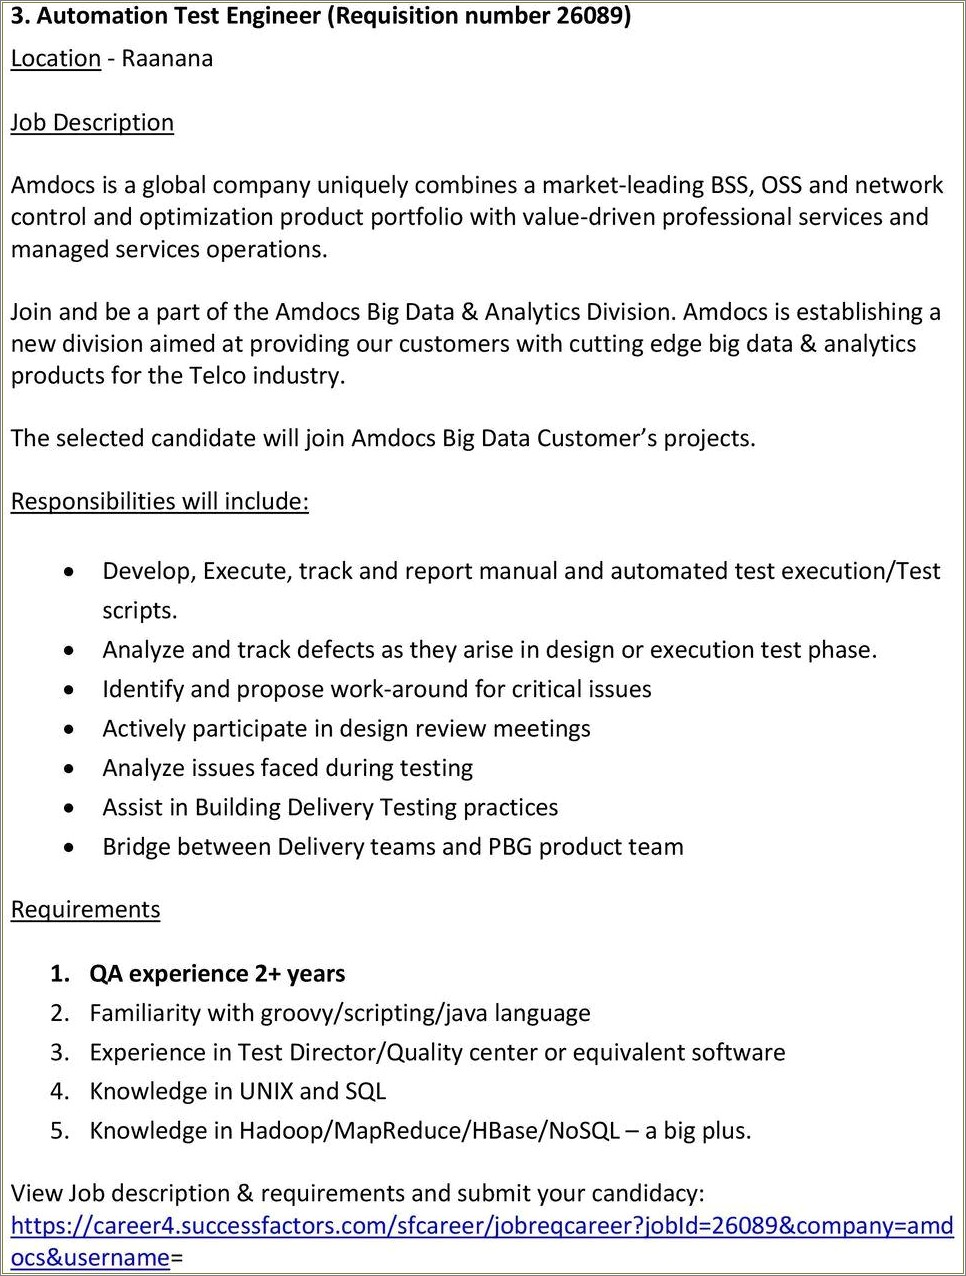 Informatica Resume For 6 Years Experience Dice Hireit